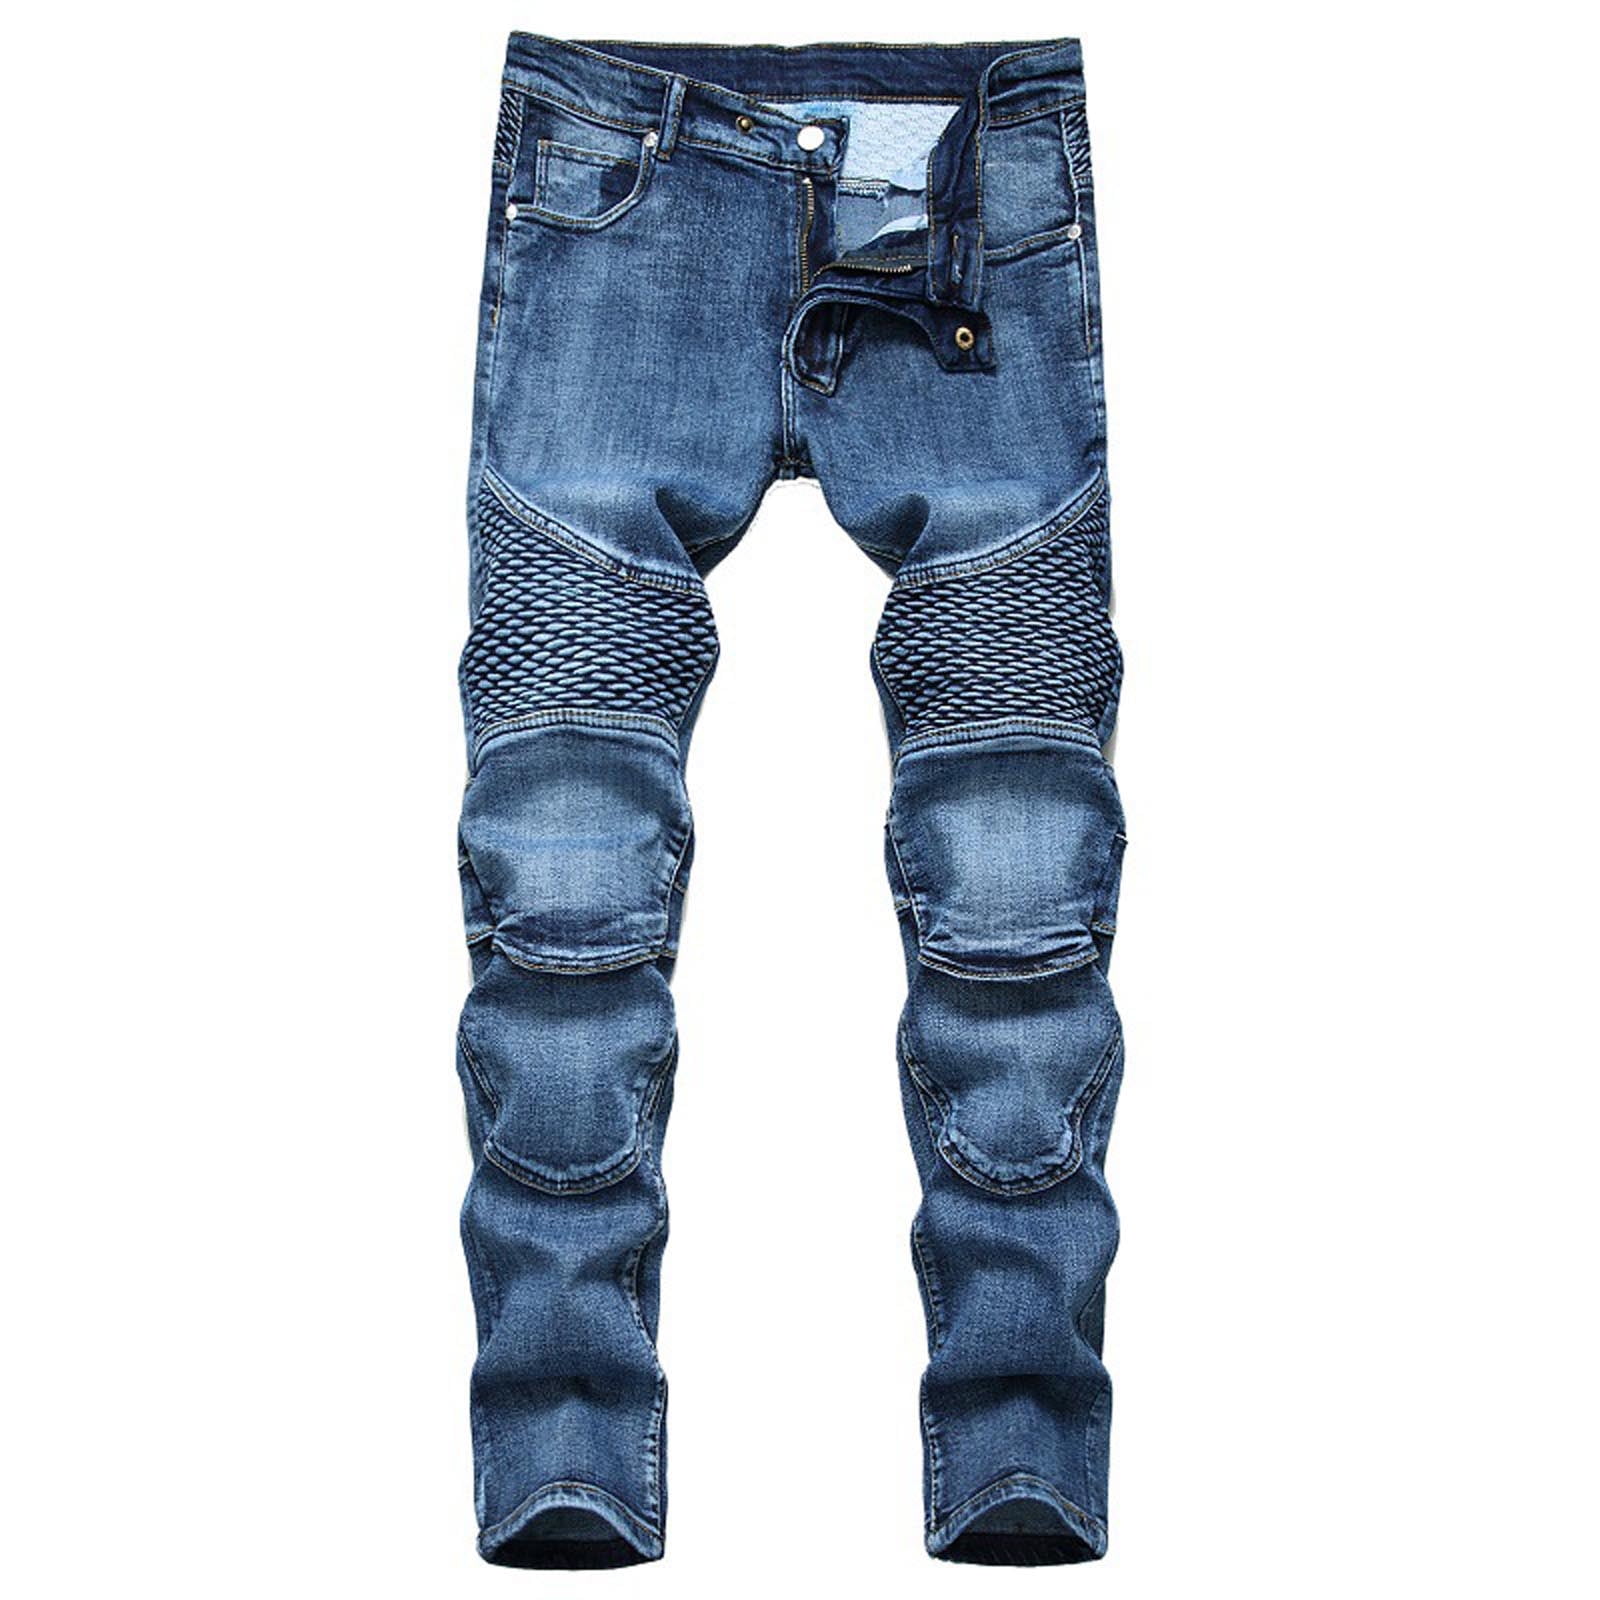 Herrnalise Men's Ripped Denim Pants New Fashion Have Pockets Button Zipper  Personality Denim Trend Jeans For Blue,M